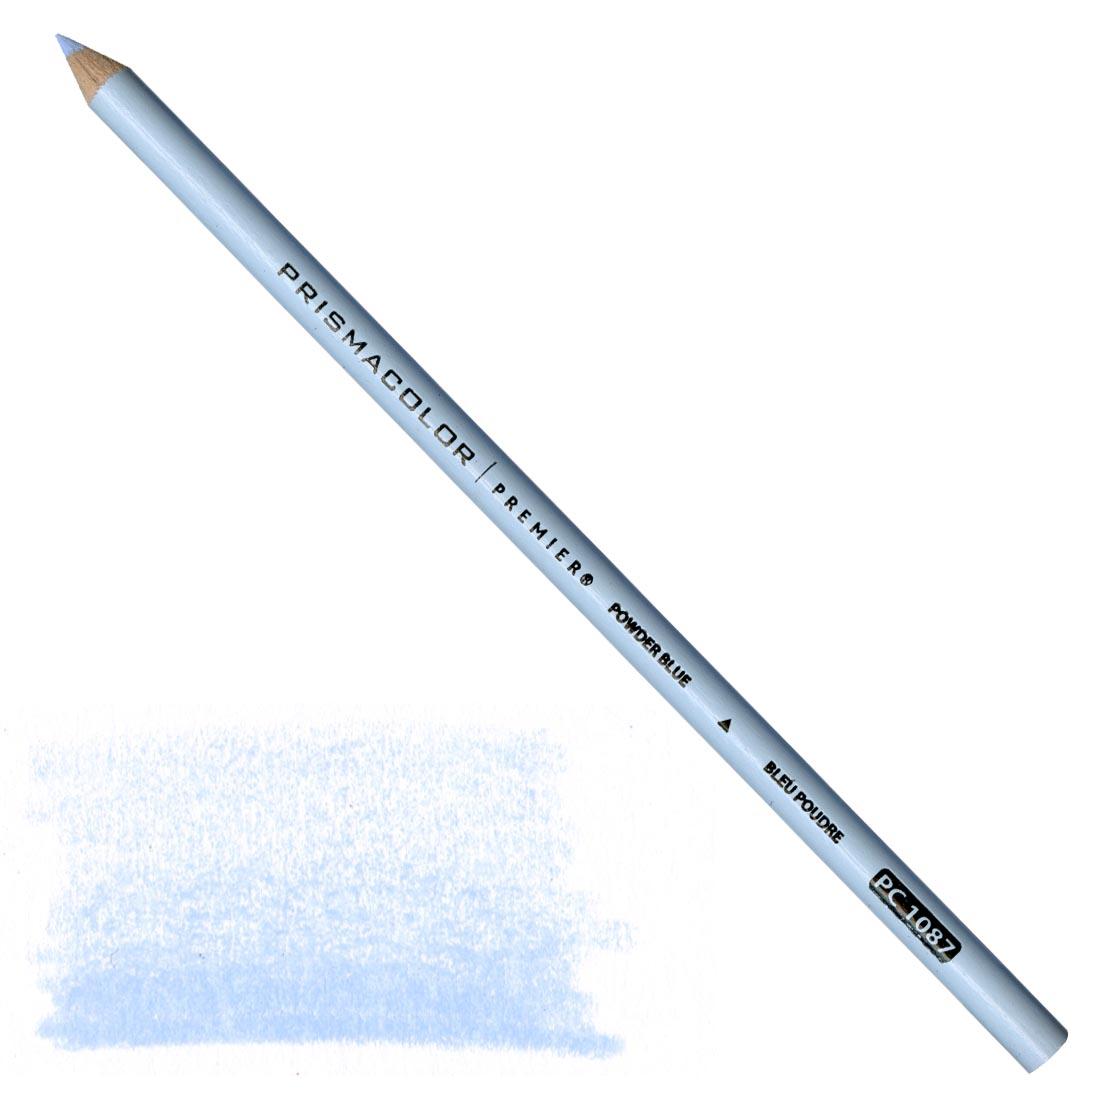 Powder Blue Prismacolor Premier Colored Pencil with a sample colored swatch